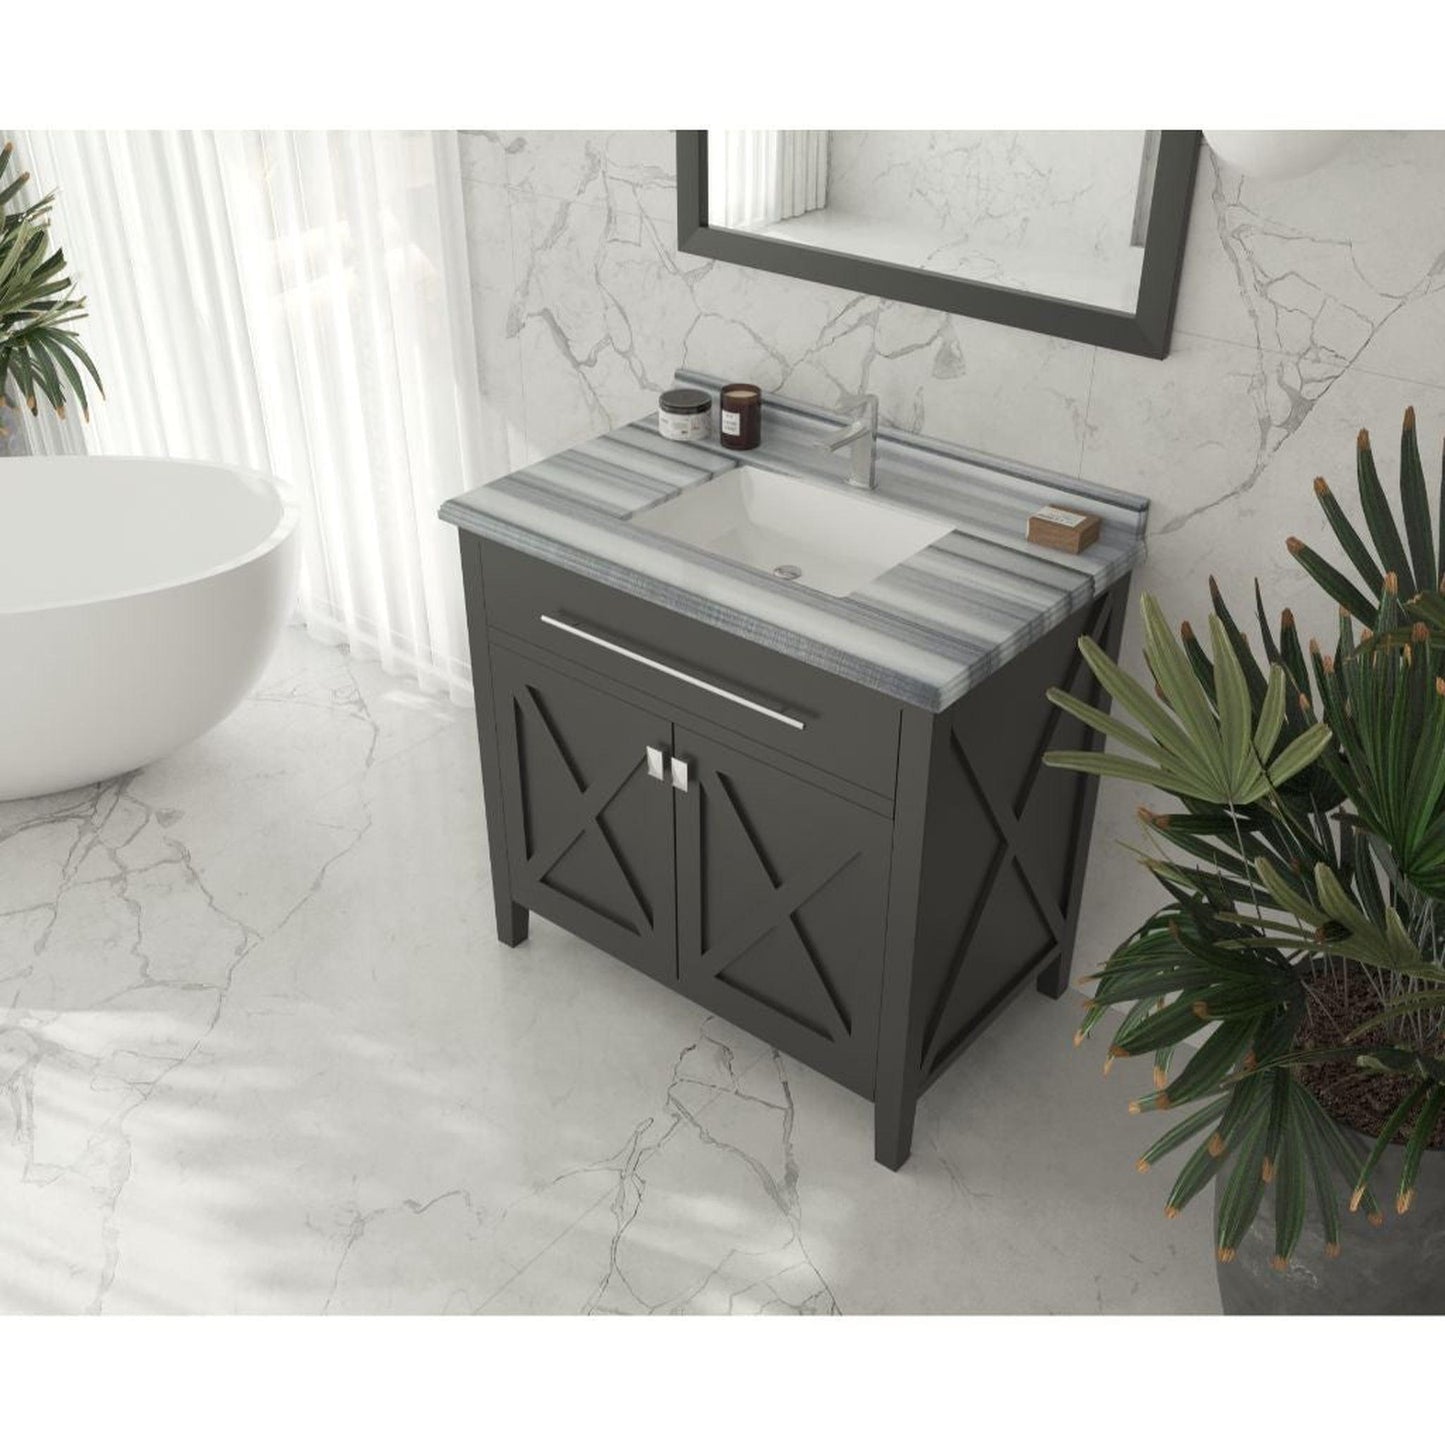 Laviva Wimbledon 36" Espresso Vanity Base and White Stripes Marble Countertop With Rectangular Ceramic Sink